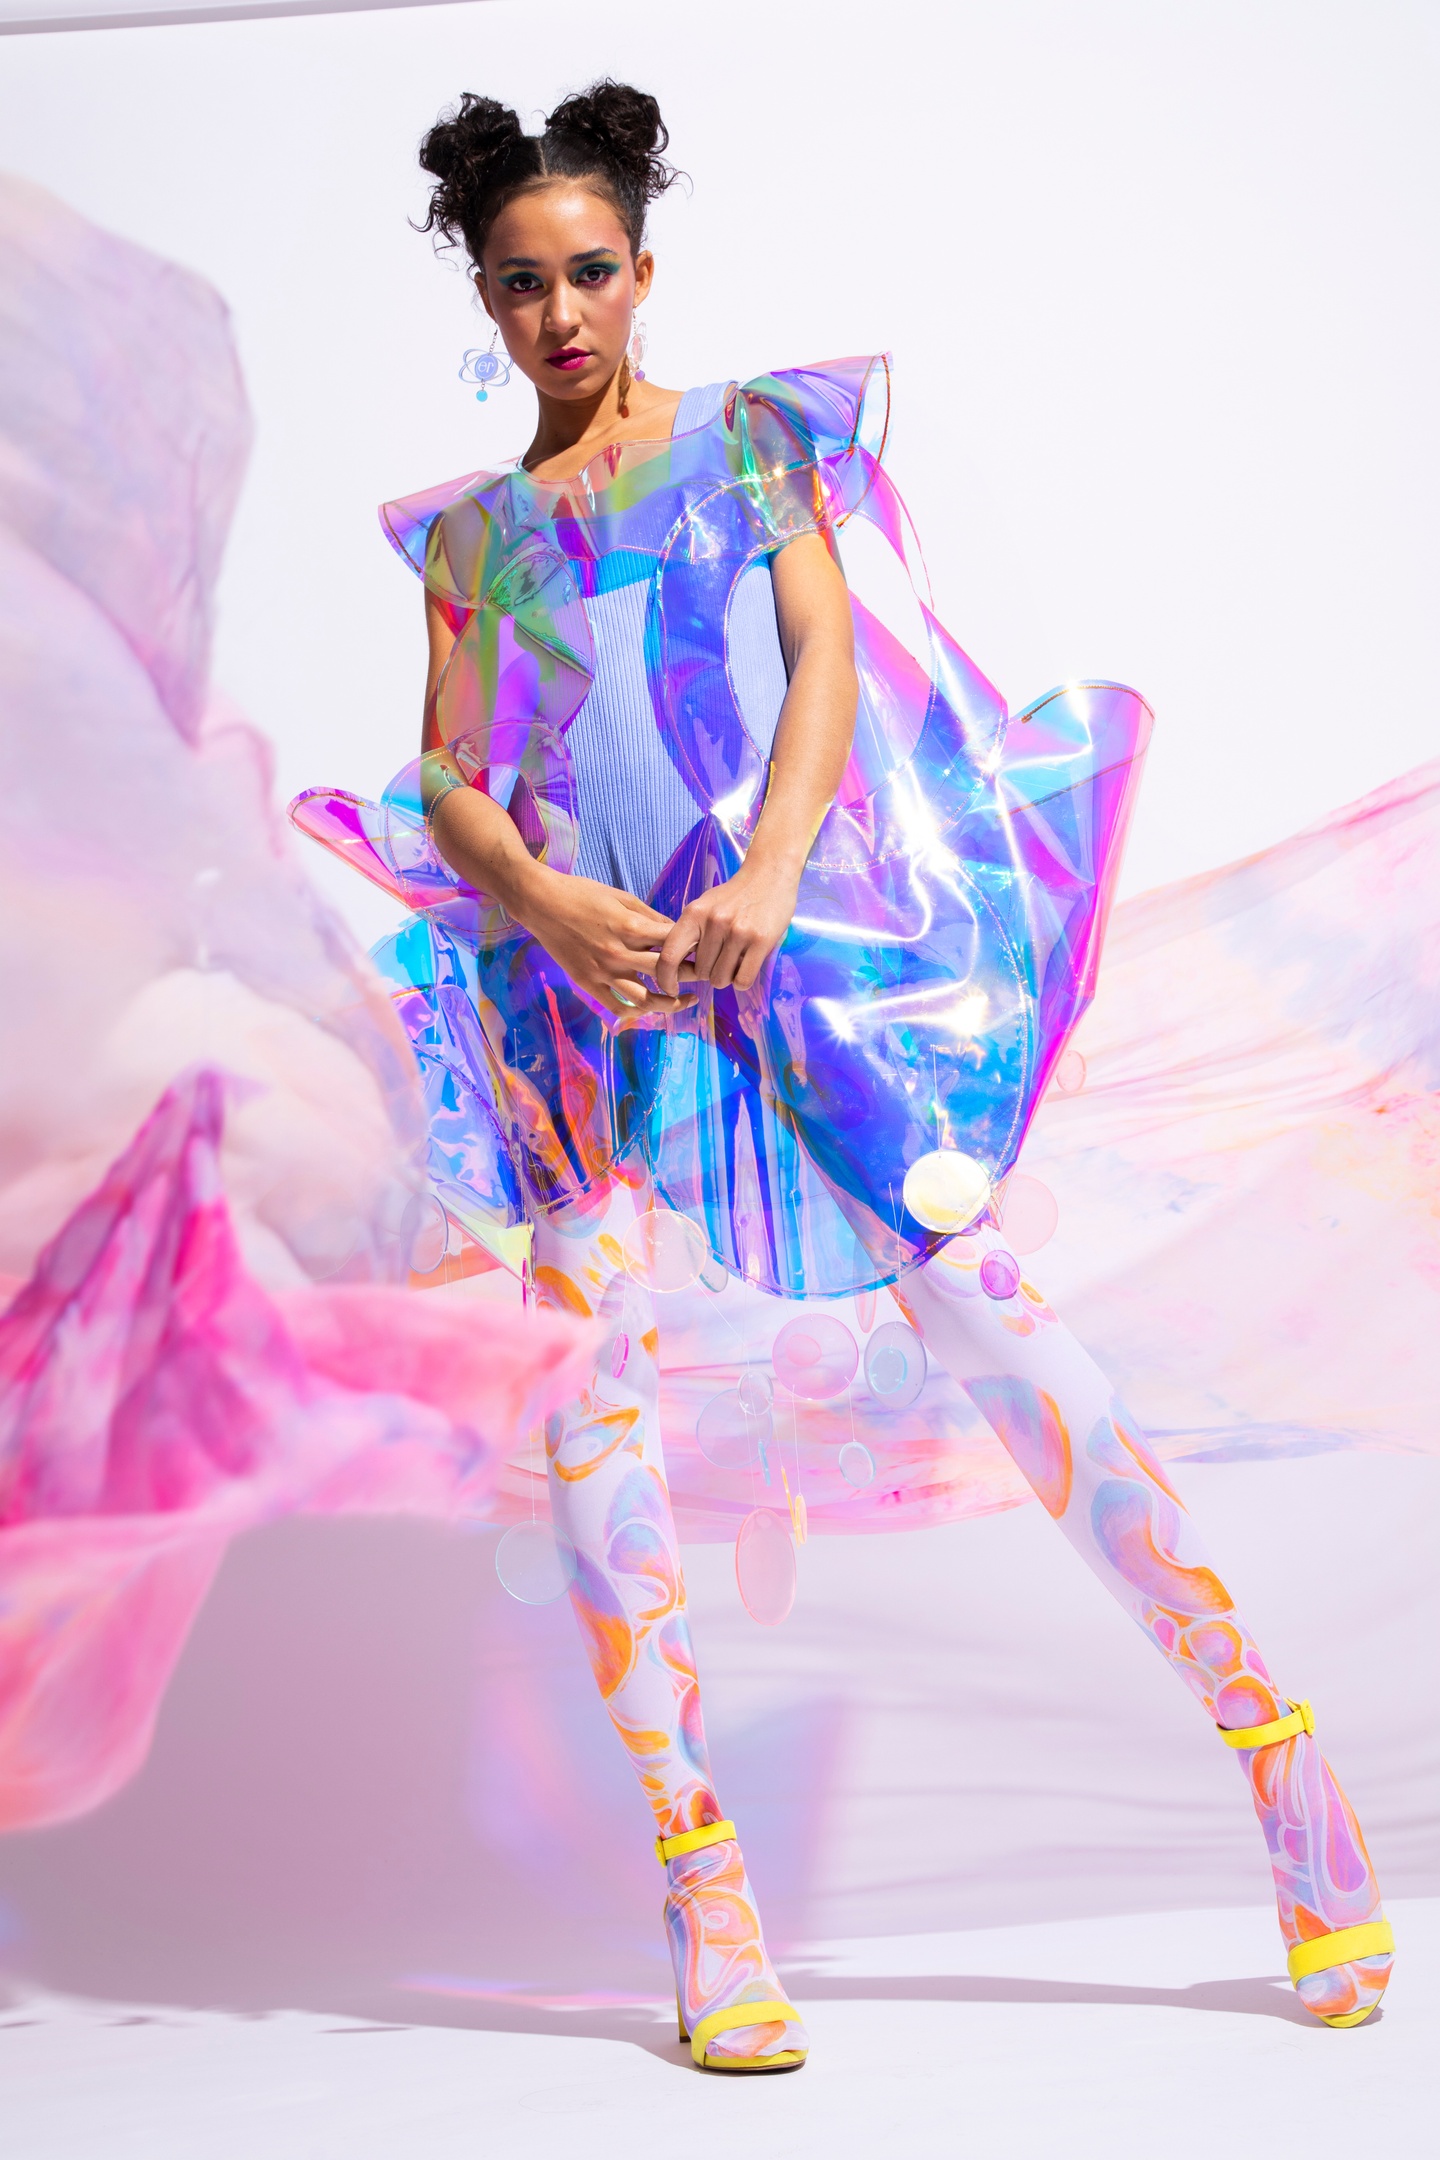 Model poses in a short, structured smock made of iridescent plastic film with rigid sleeve caps and upward-turned cuffs around the hips.